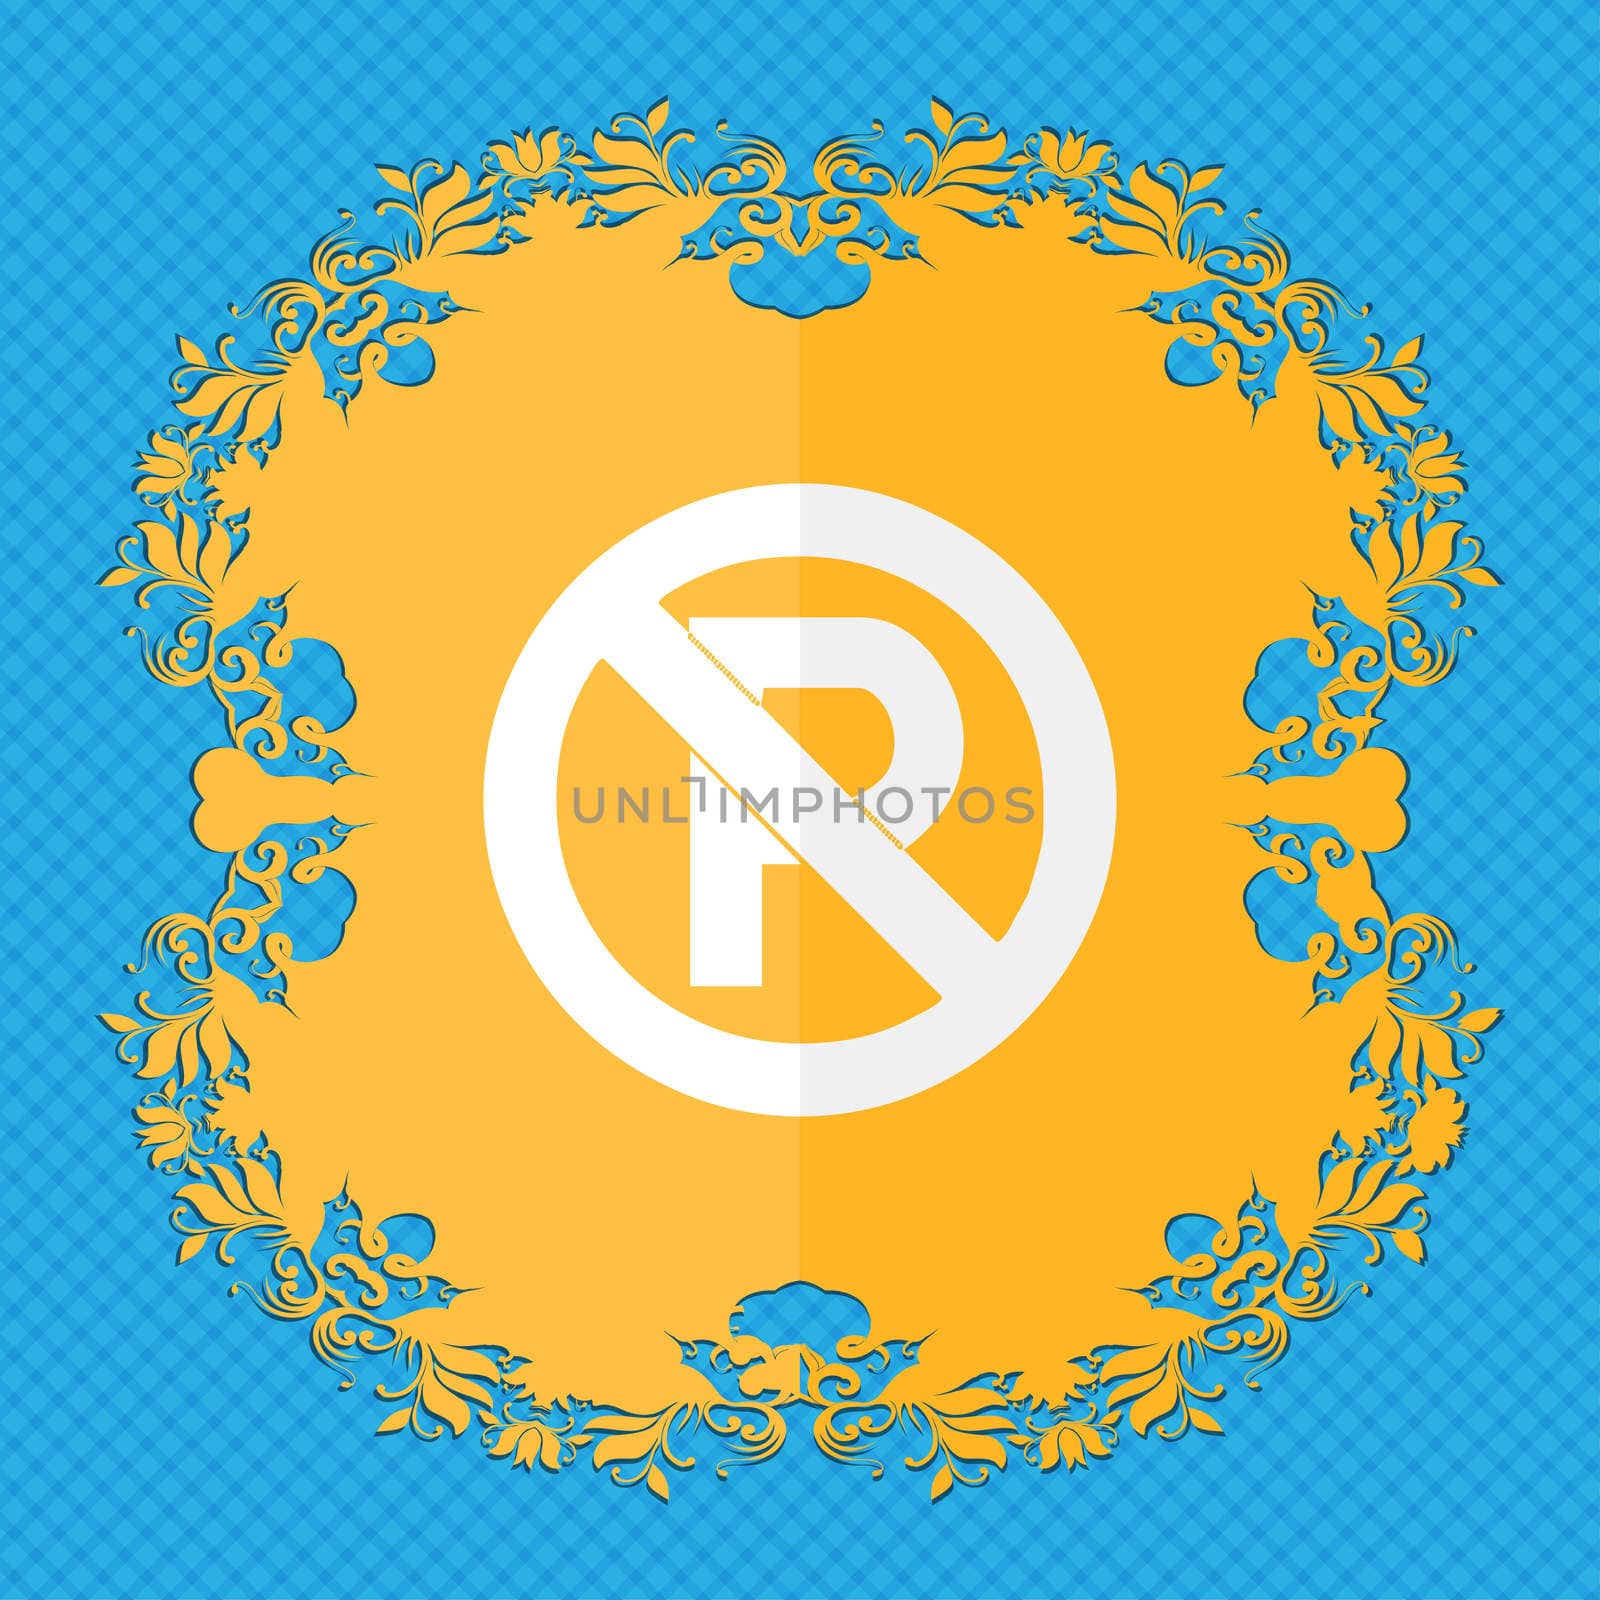 No parking. Floral flat design on a blue abstract background with place for your text. illustration